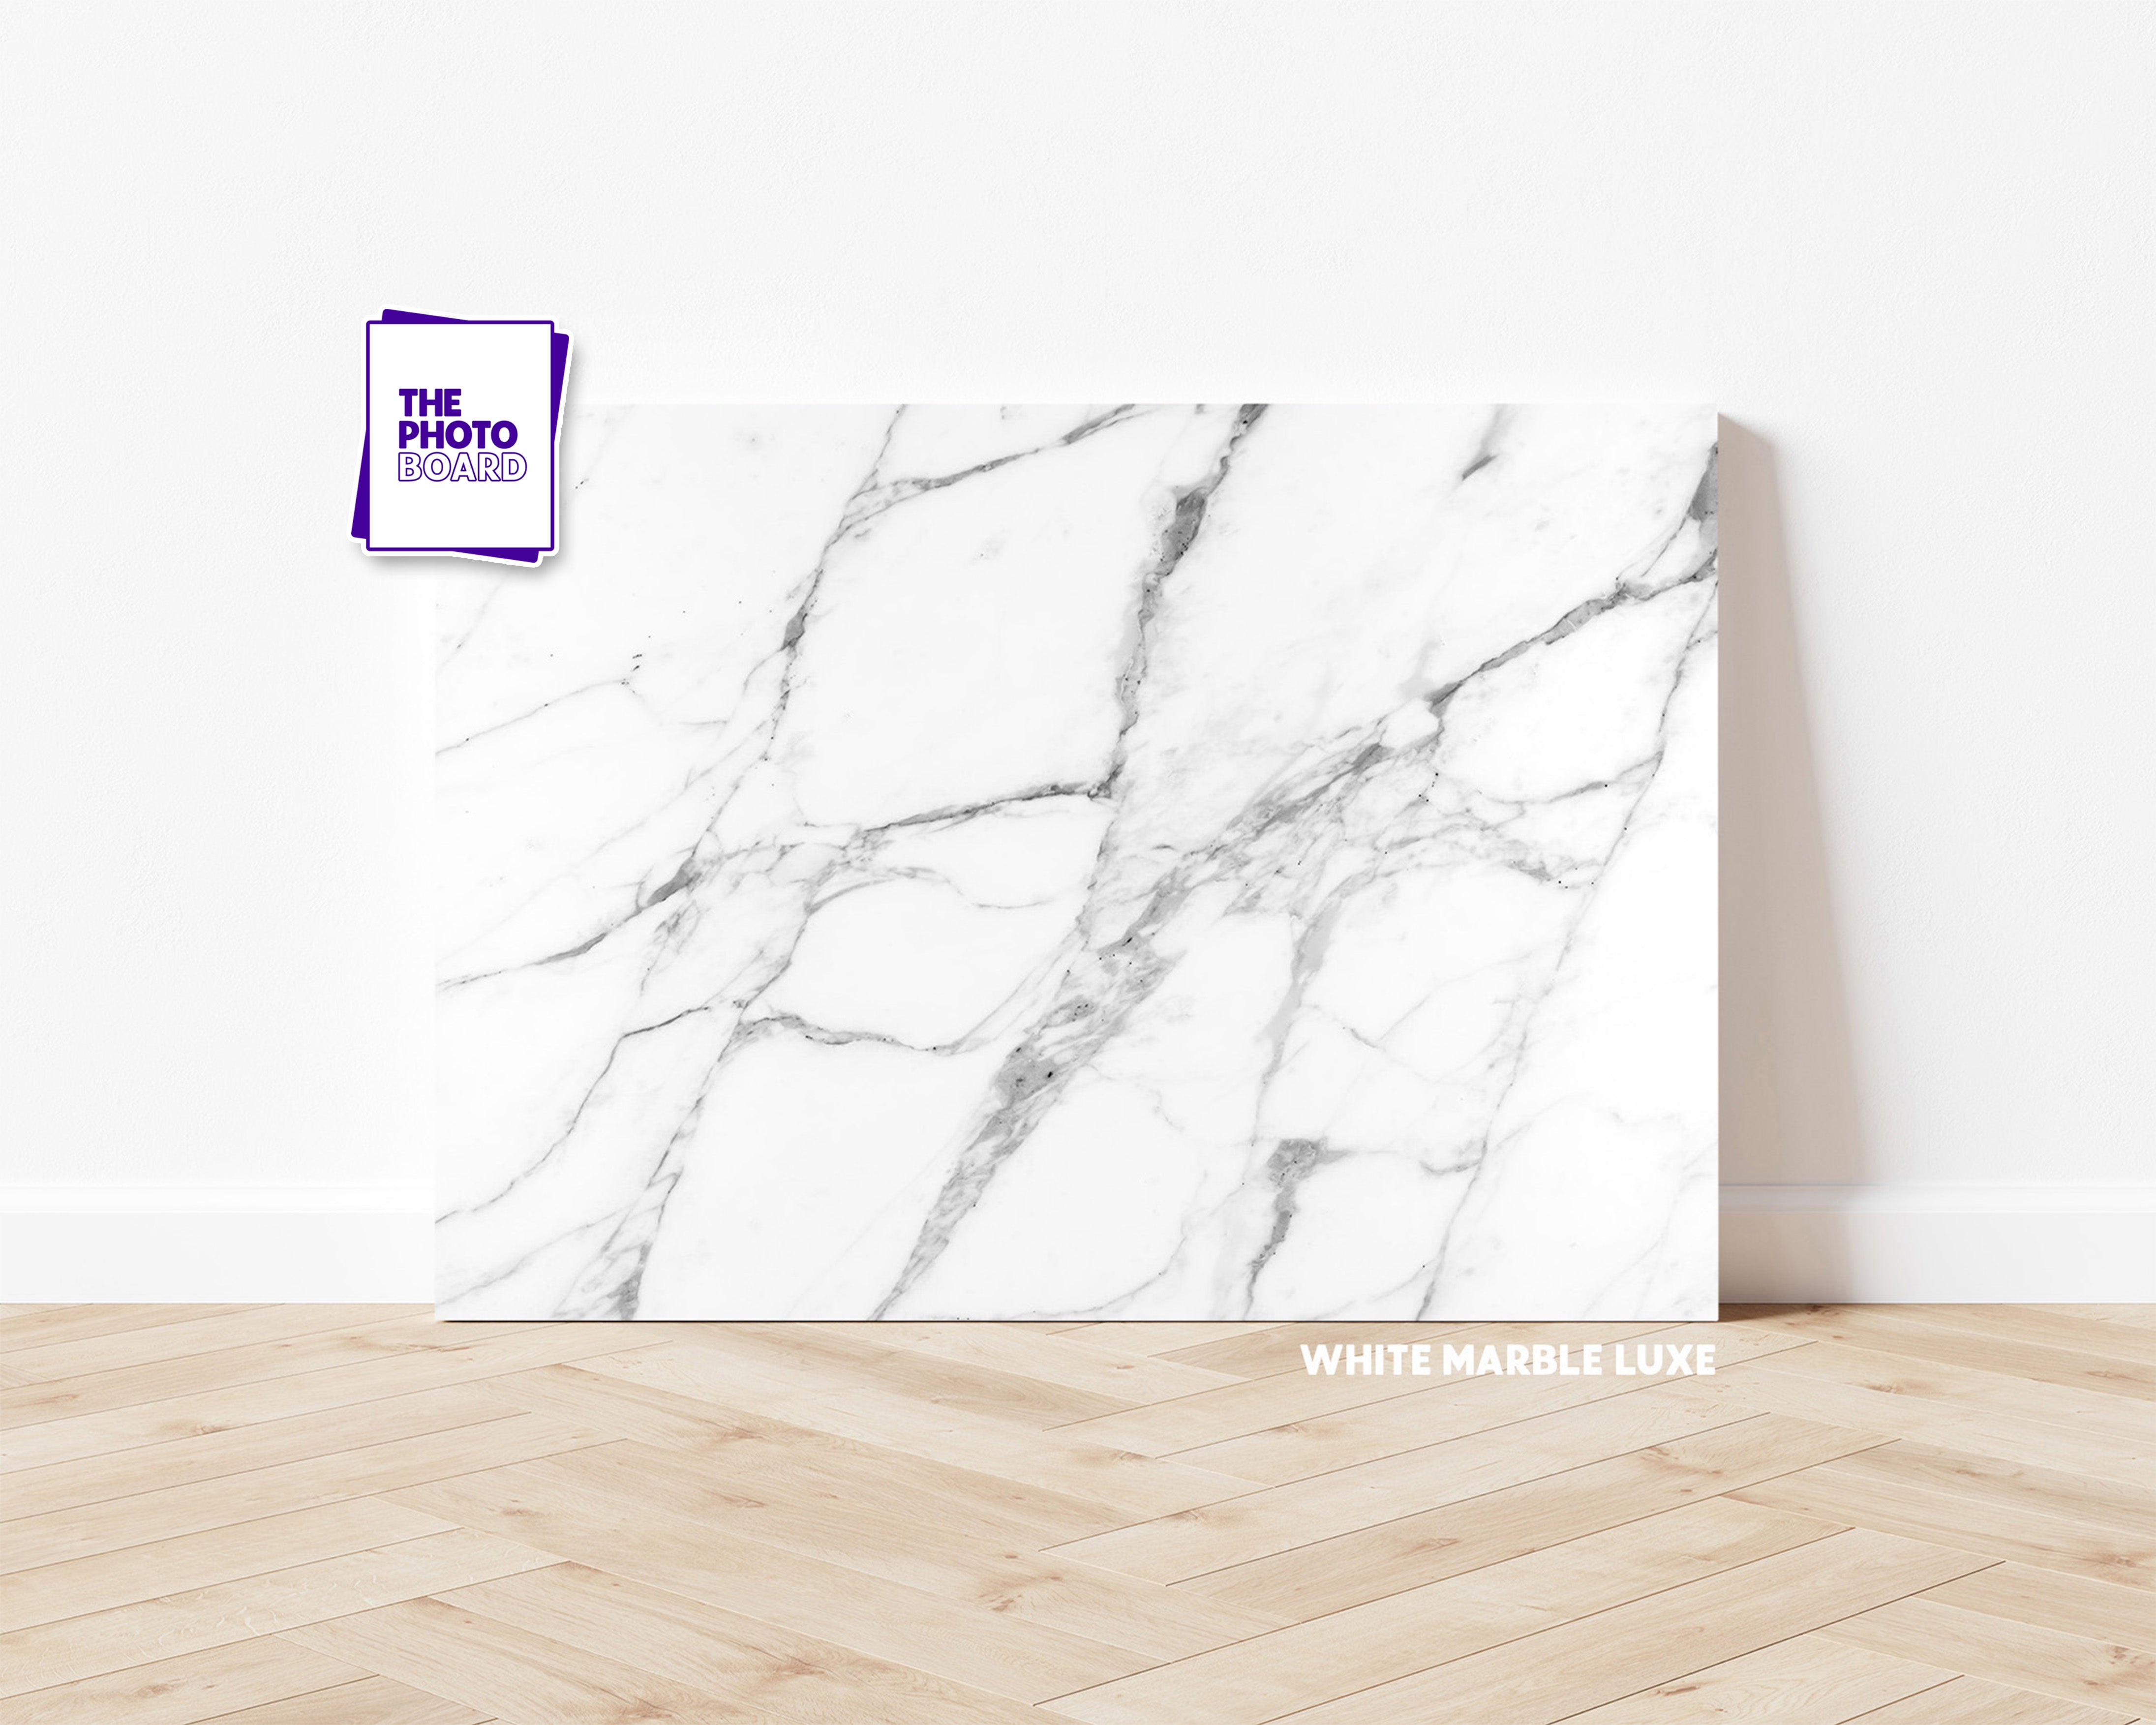 White Marble Luxe